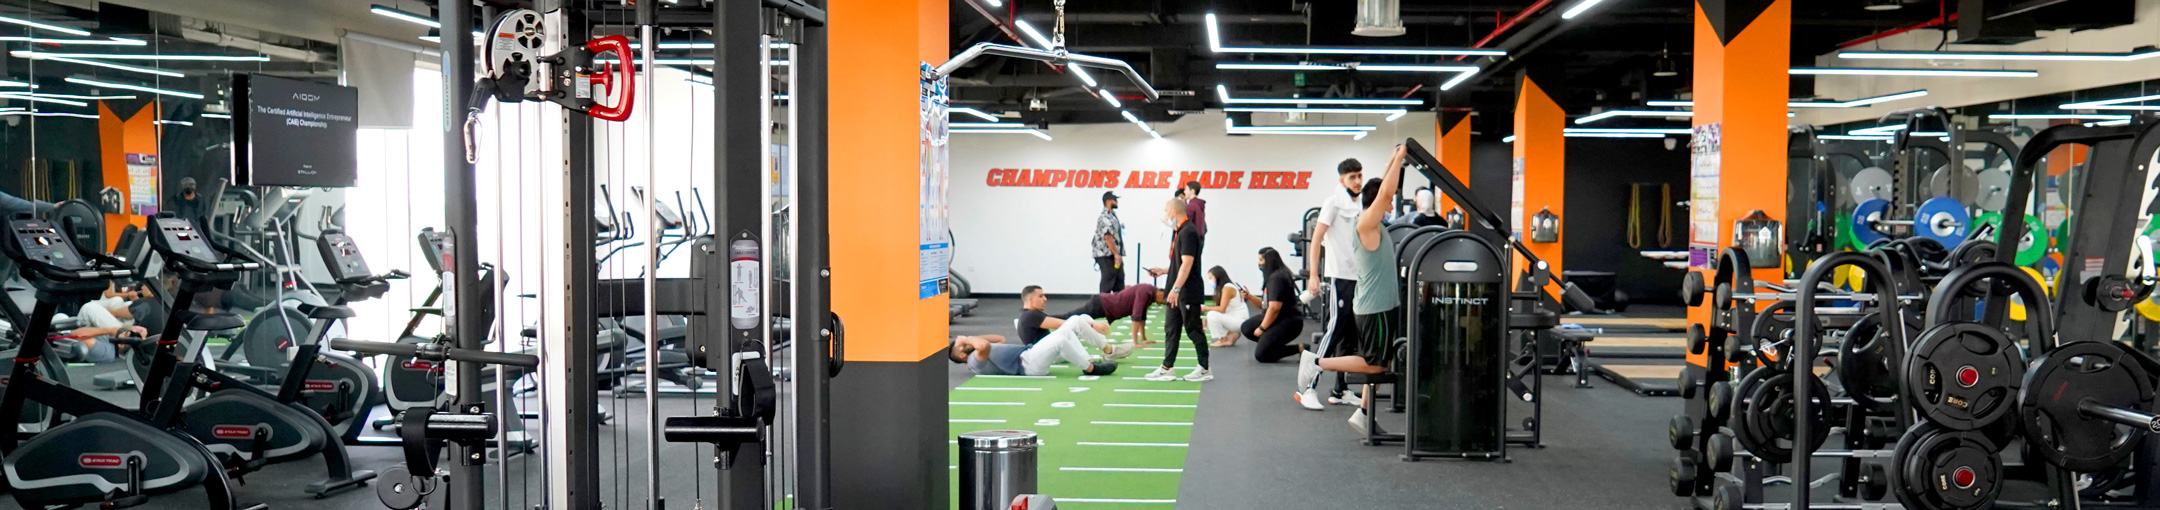 RIT Dubai Gym with Students